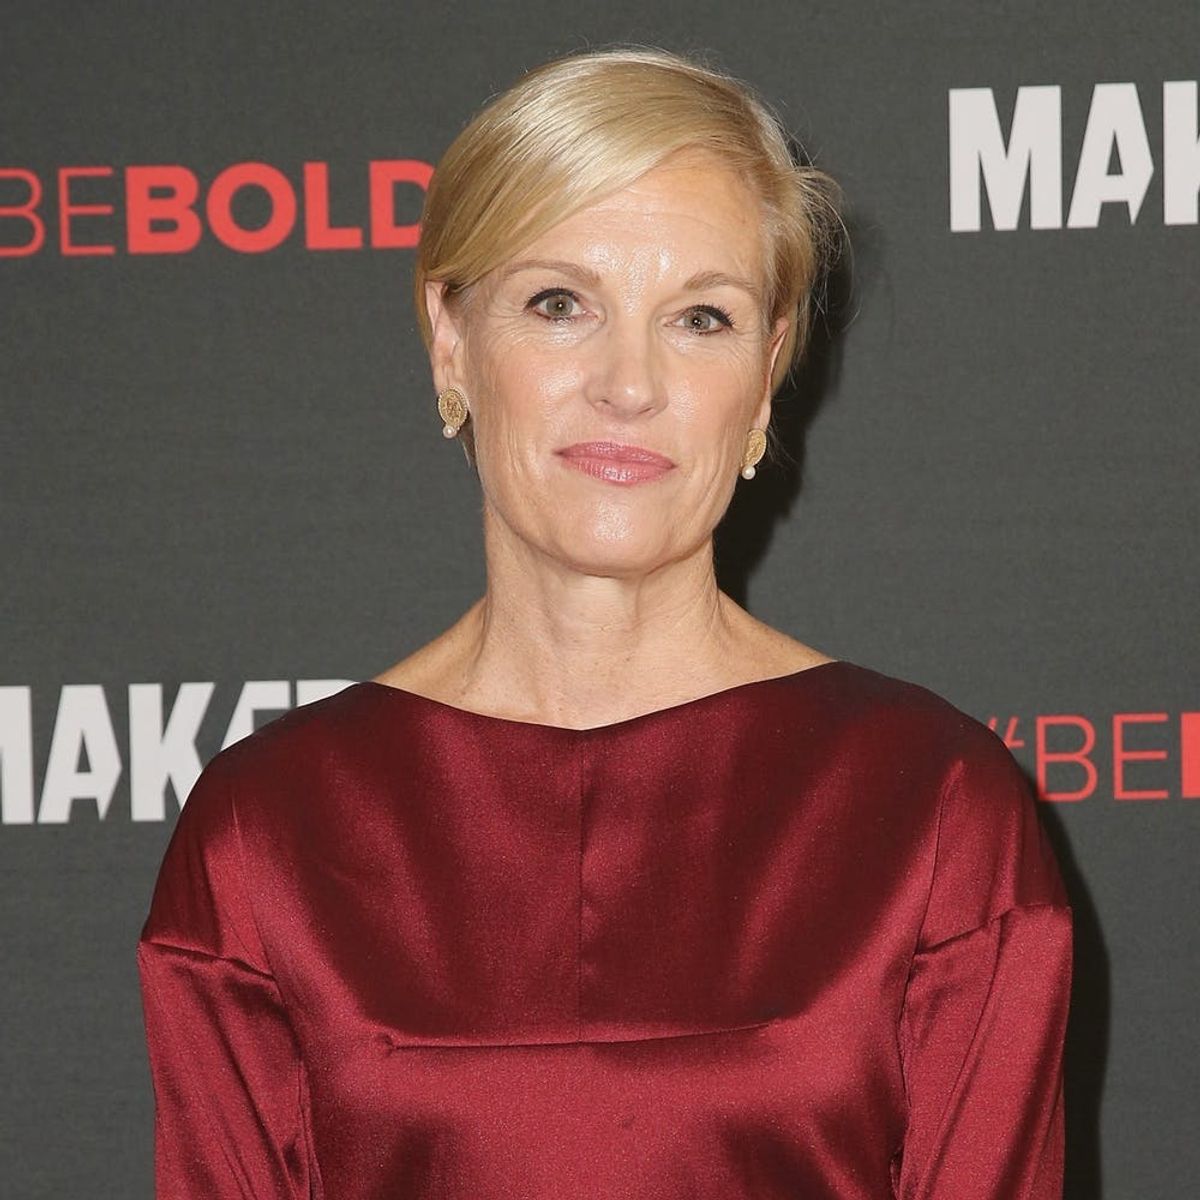 Planned Parenthood President Cecile Richards Reportedly Plans to Step Down